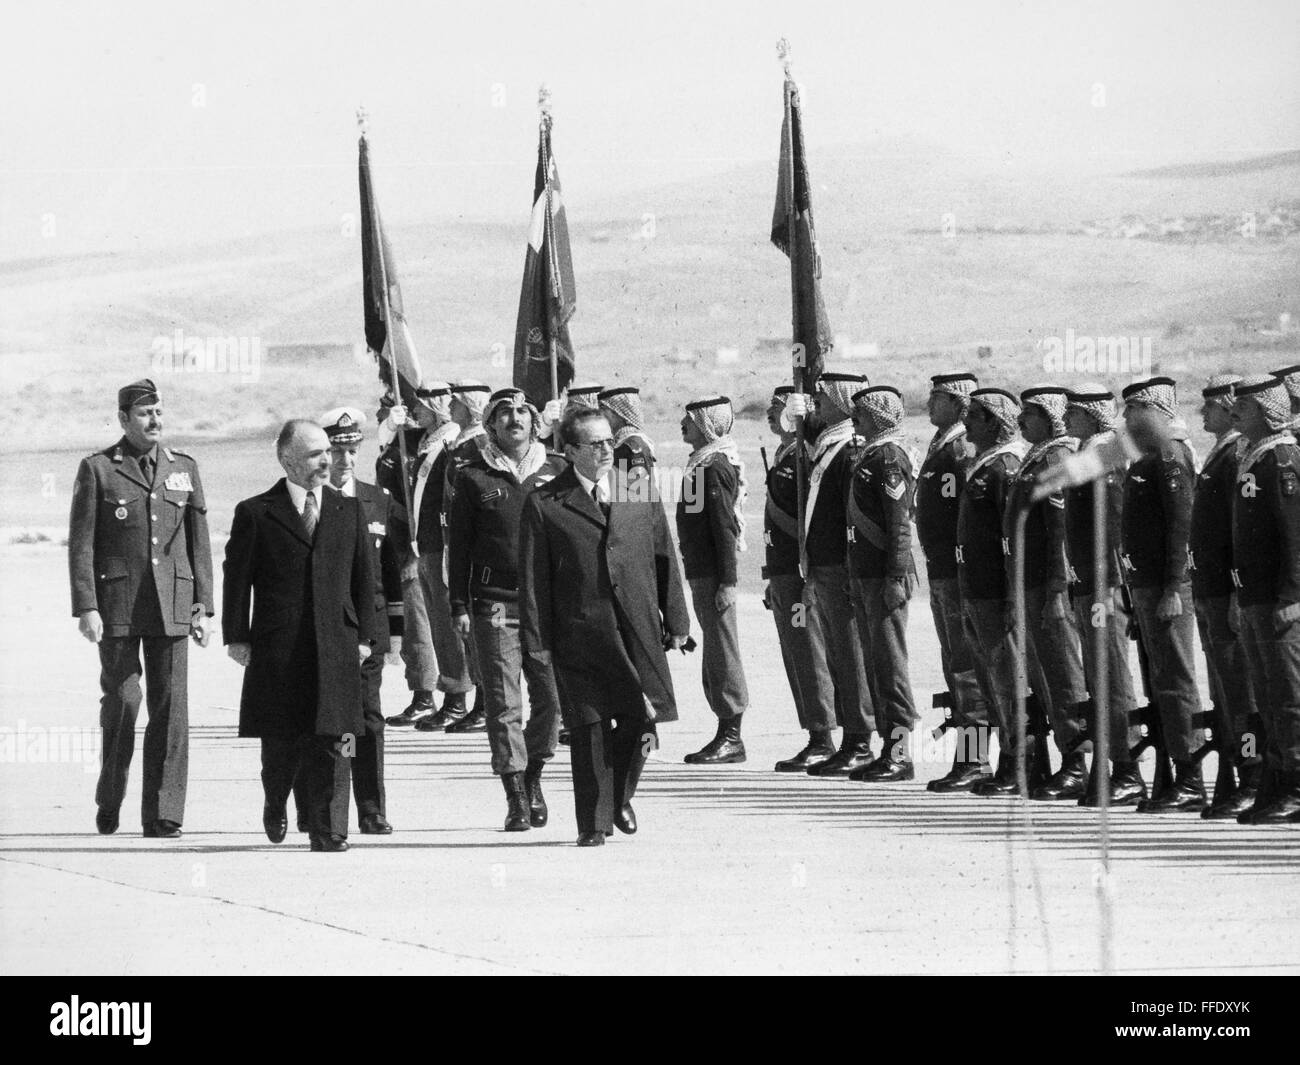 JOSIP BROZ TITO (1892-1980)./nYugoslav soldier and statesman. Tito welcomed to Jordan by King Hussein and Prince Hassan. Photographed 1979. Stock Photo